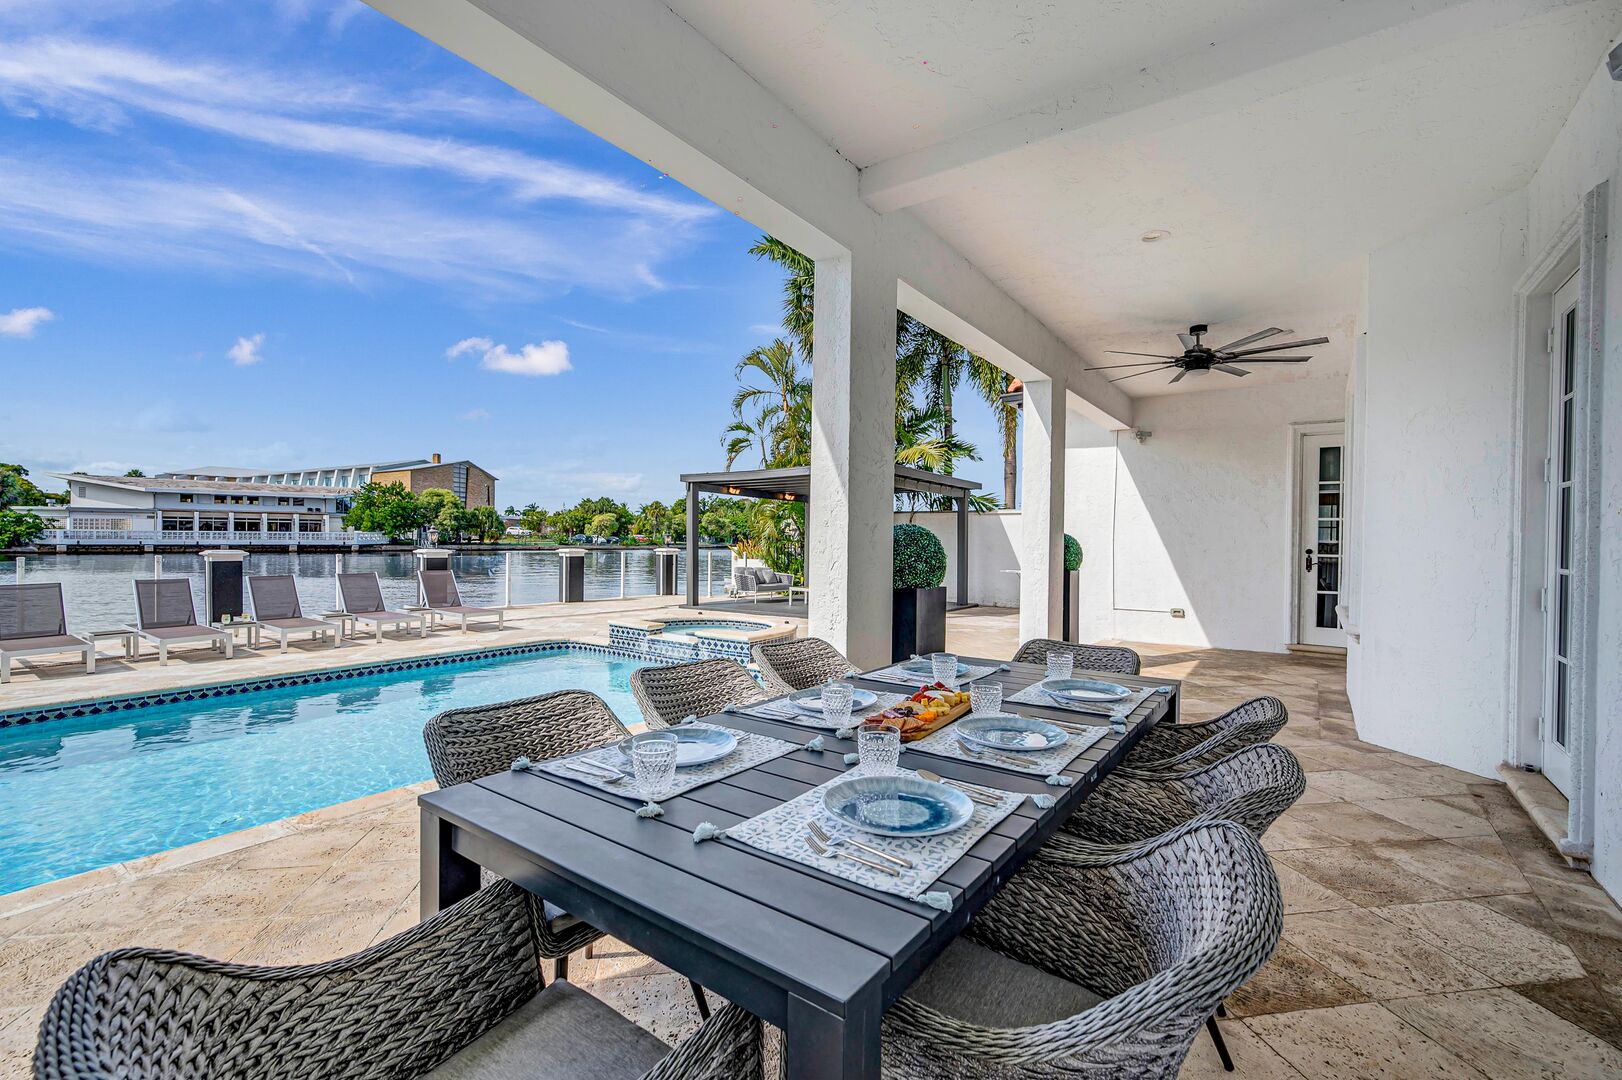 Relish in the waterfront tranquility with canal views from the heated pool, secluded outdoor lounge area by the private dock.